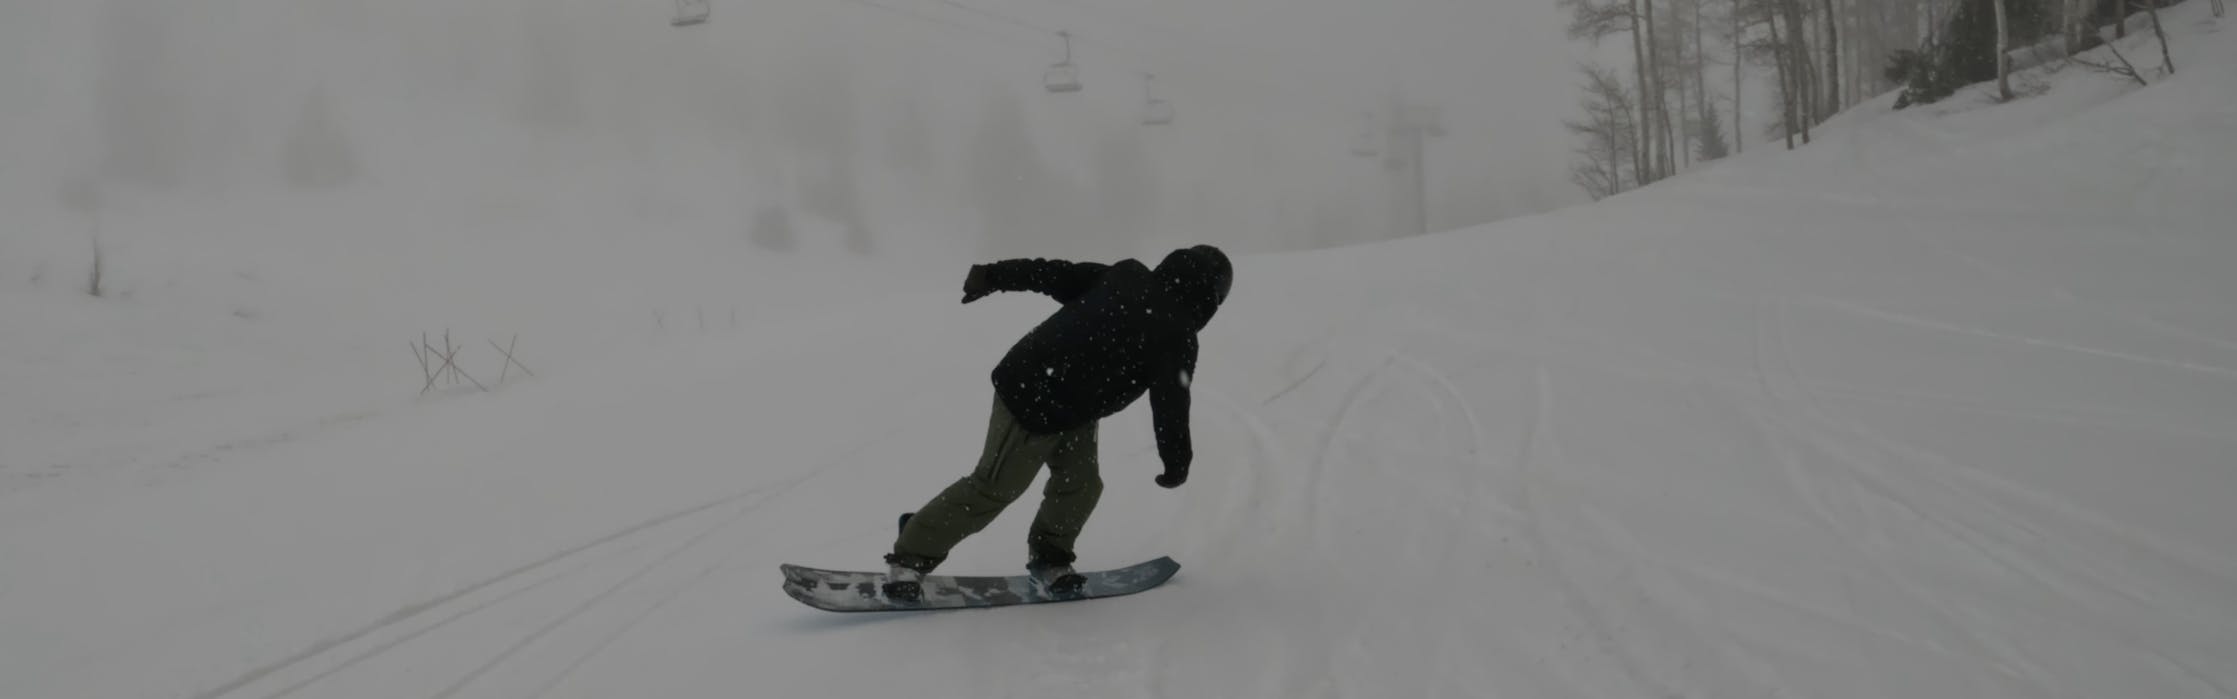 A snowboarder on the Yes. Warca Snowboard. 